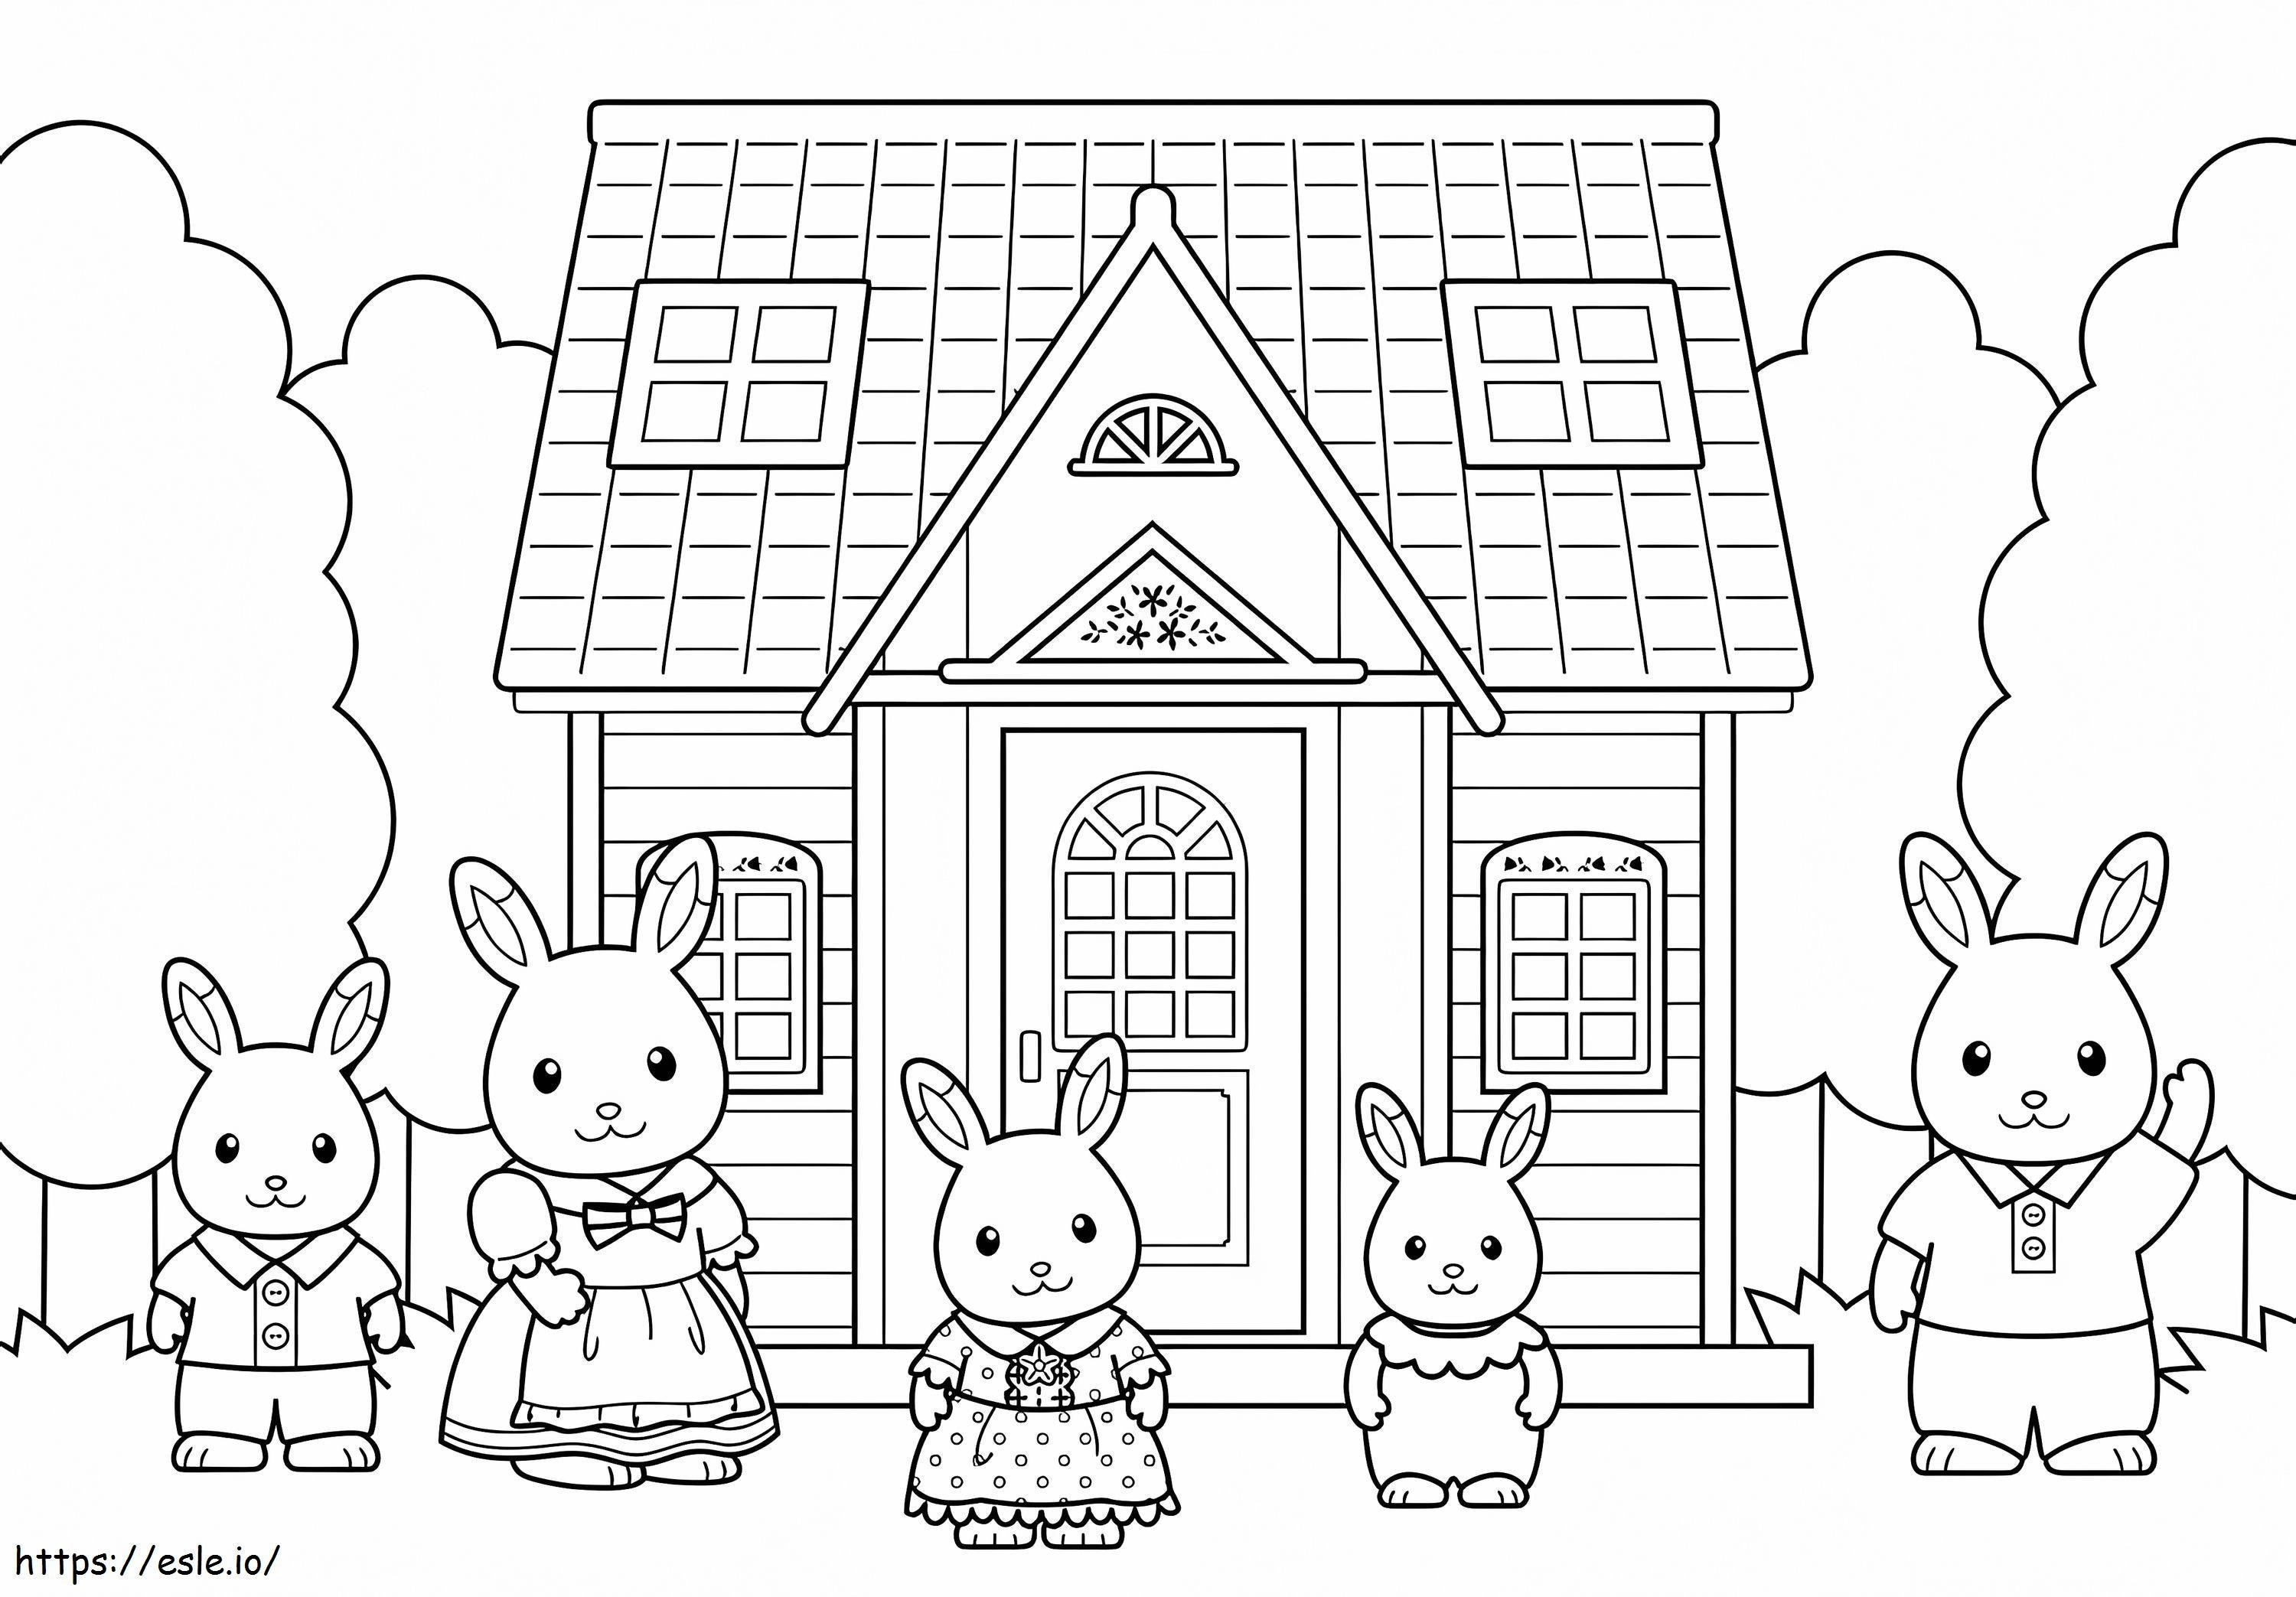 Sylvanian Families House coloring page